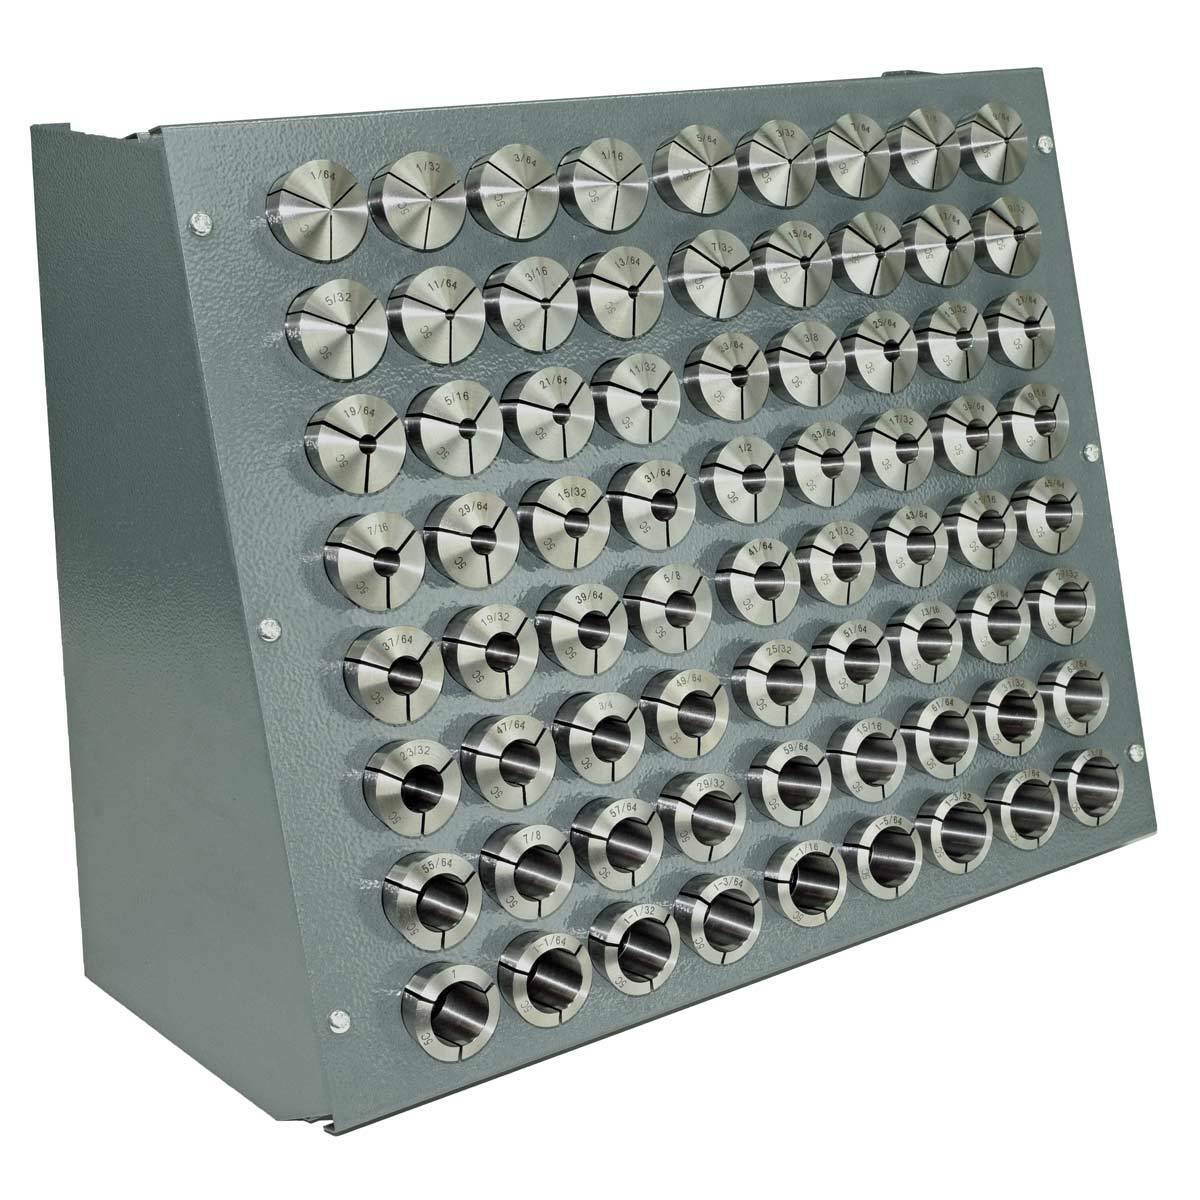 72 Pc. Precision Inch 5-c Collet Set W/rack, 1/64″ To 1-1/8" 1/64th Sizes 5 C